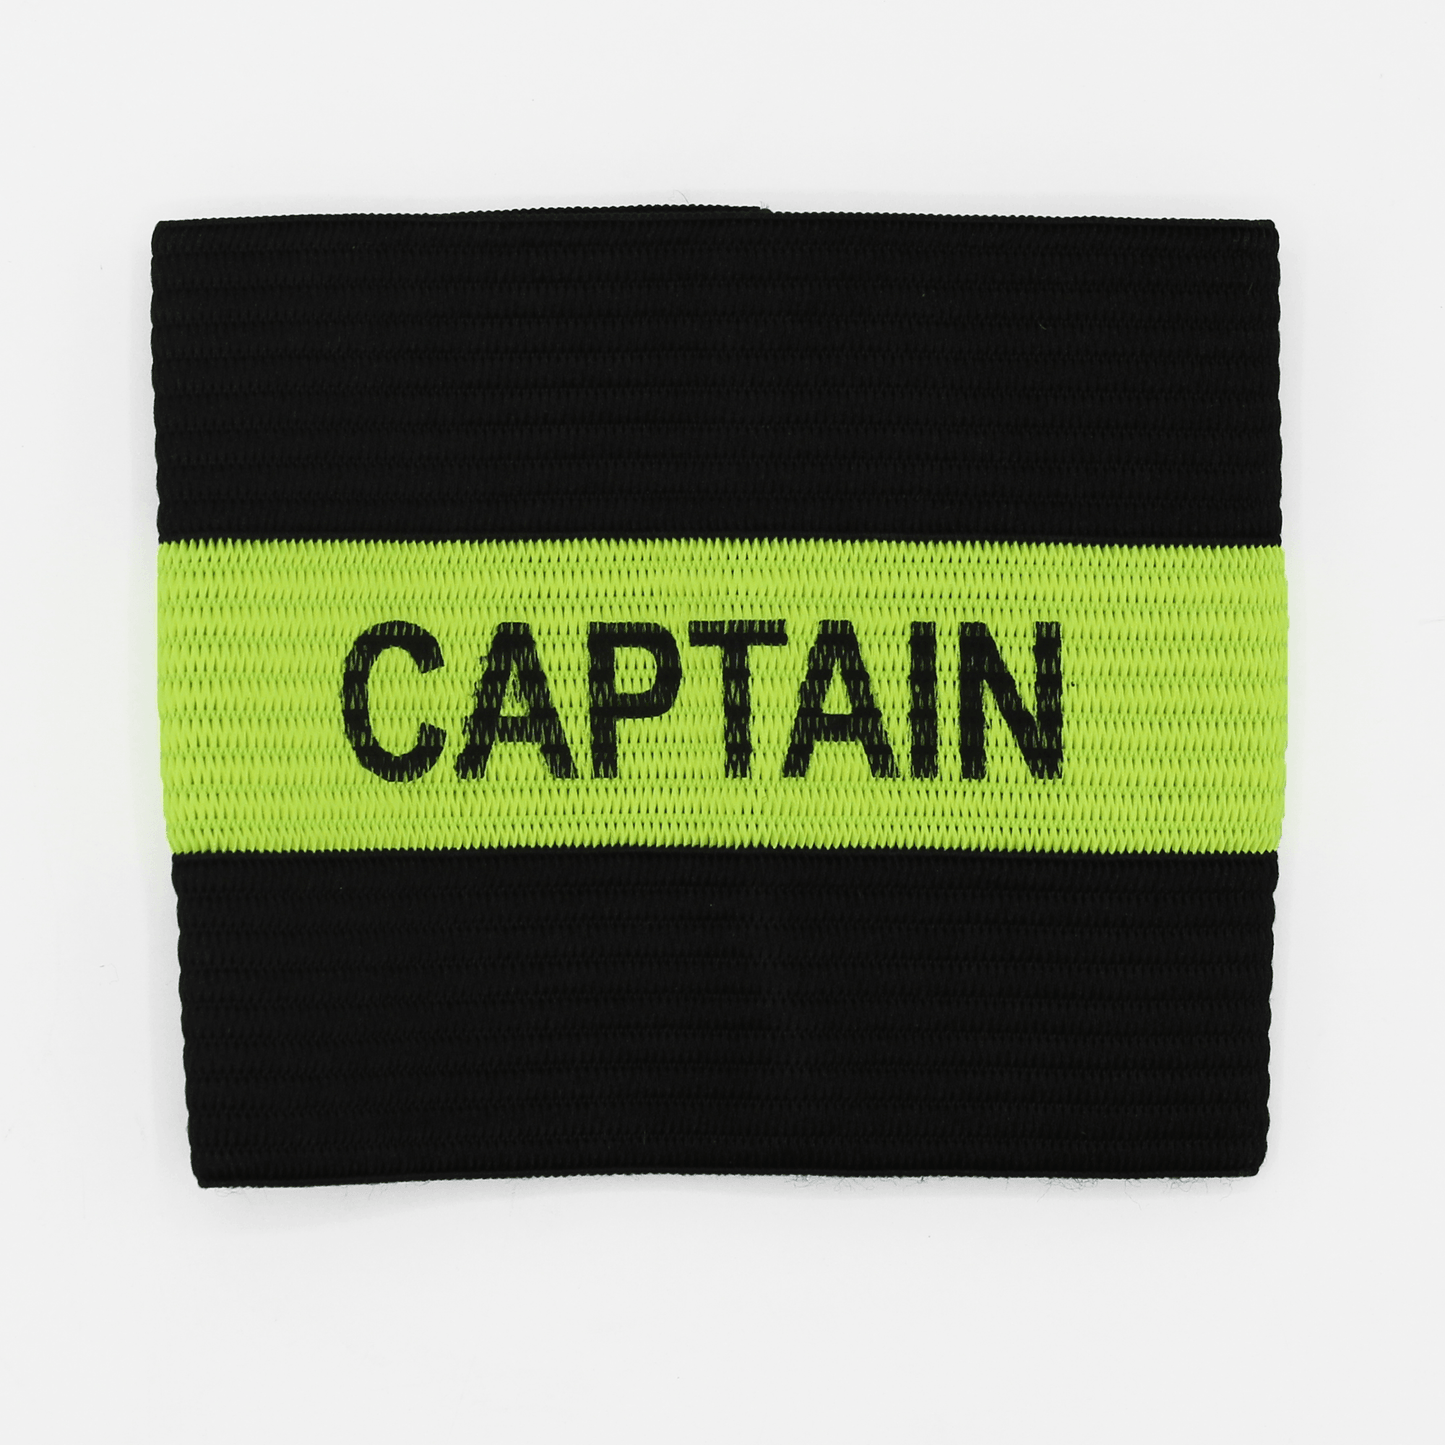 Captains Arm Band Adult / Kids Size - Fitness Health 